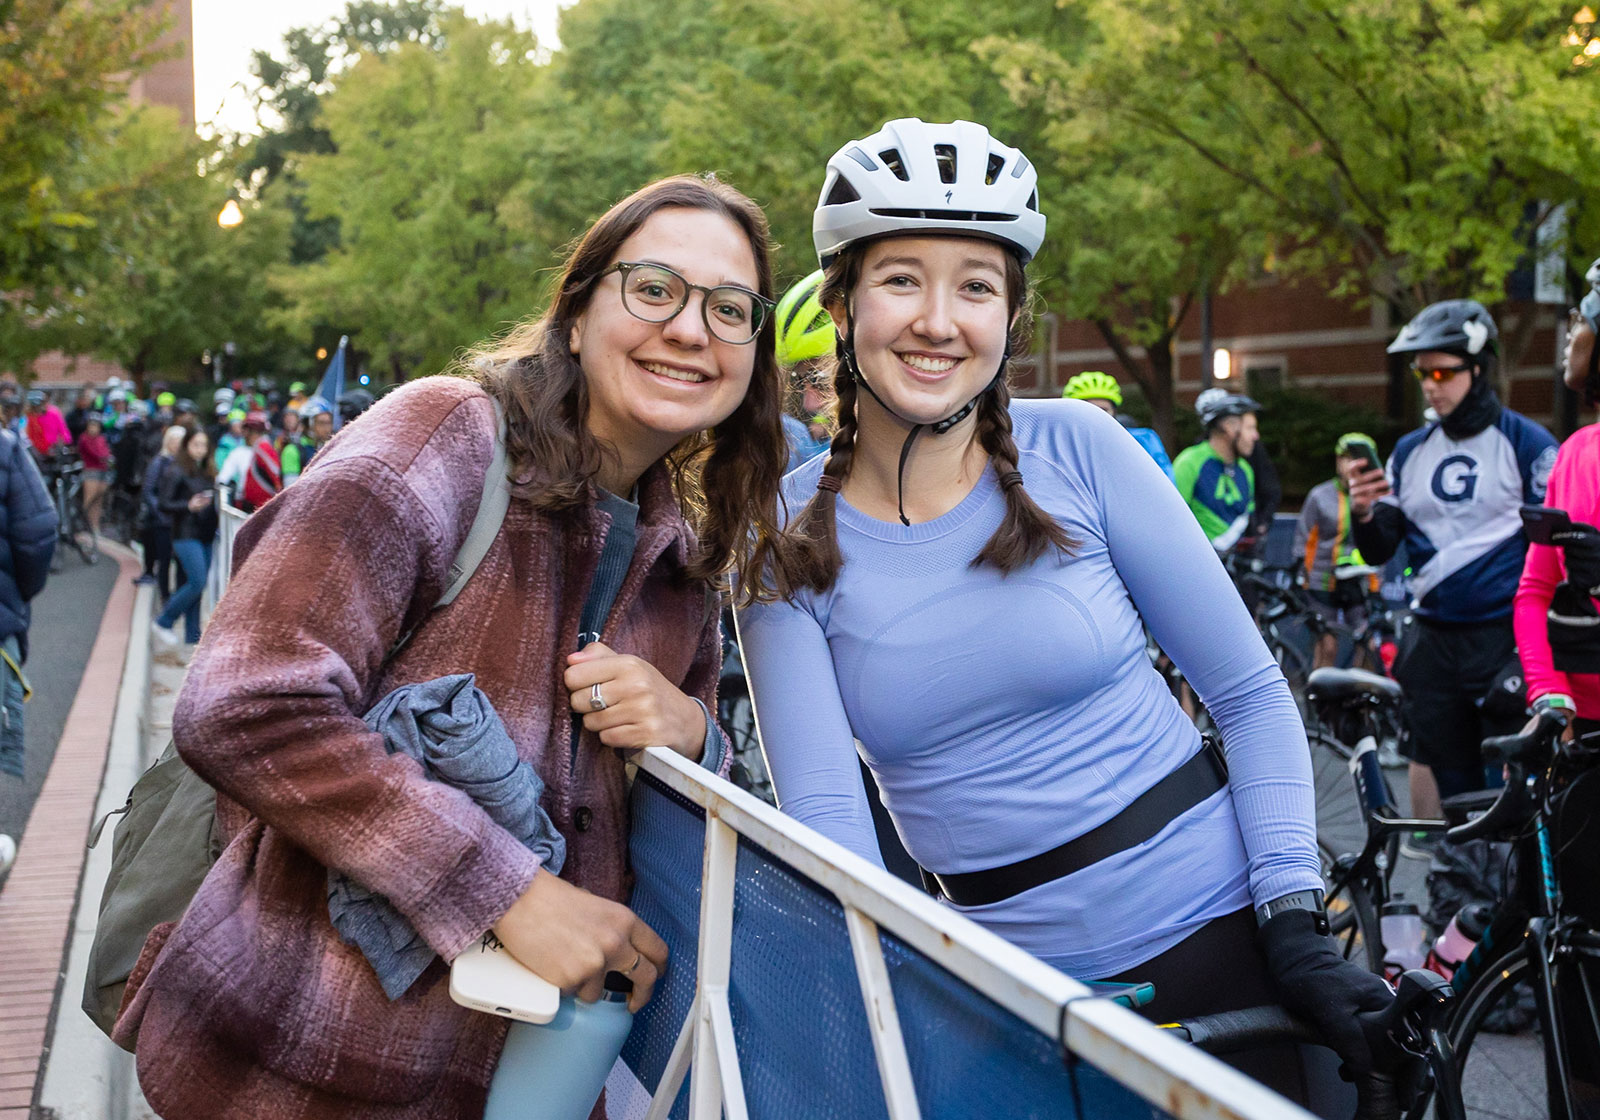 BellRinger Rider and friend at the start line at Georgetown University